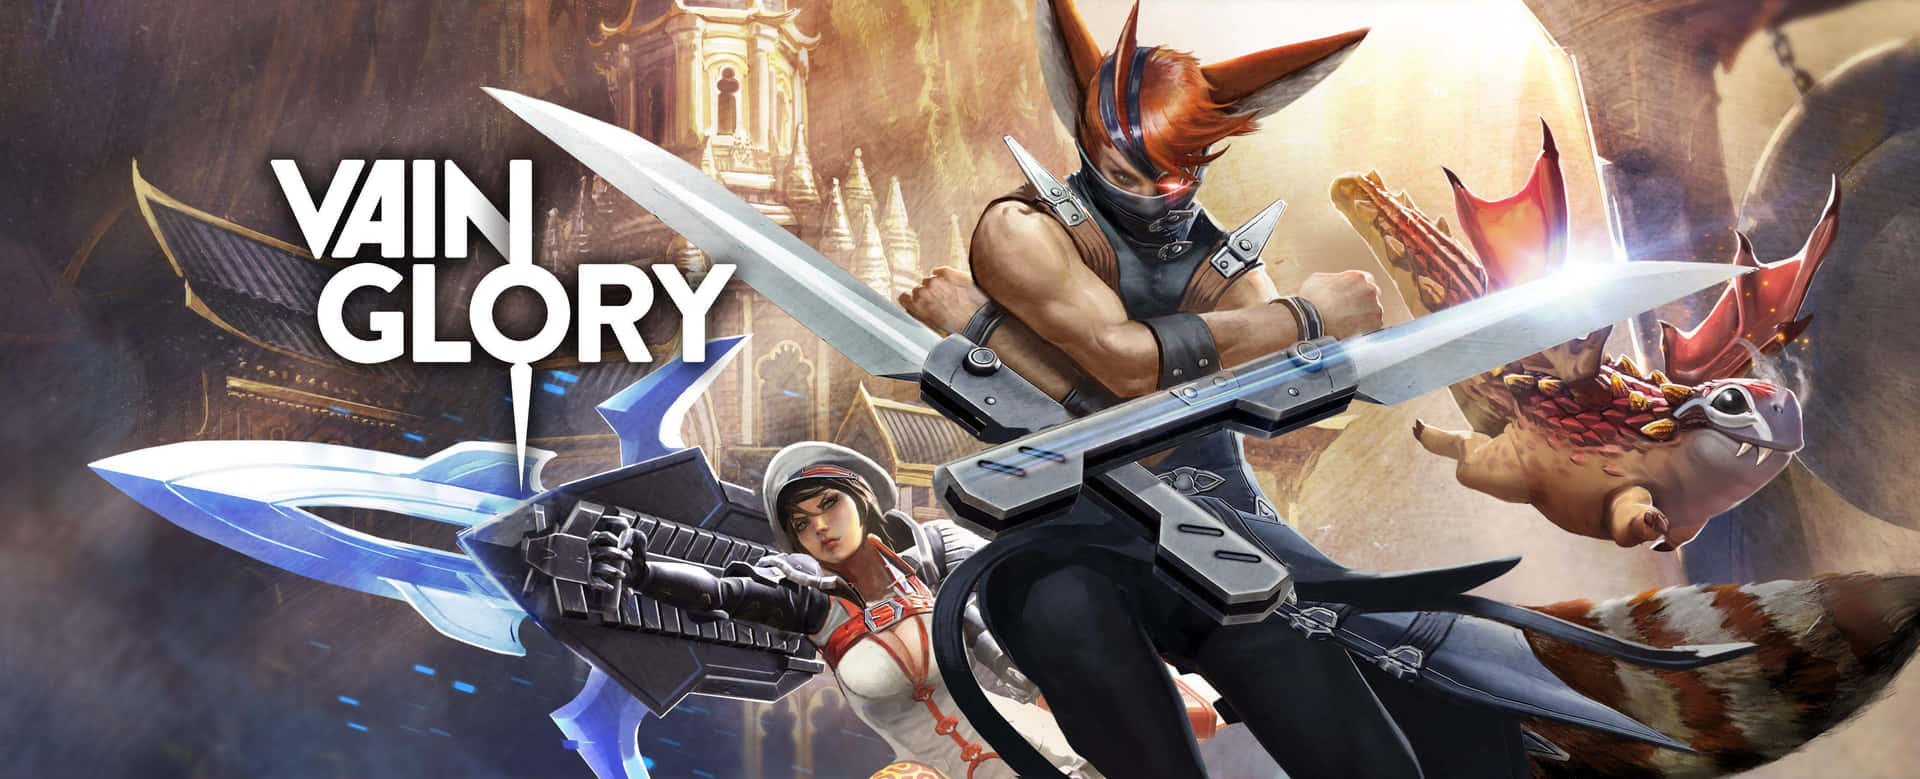 Join Players From All Over The World In Vainglory's Epic 5v5 Multiplayer Online Battle Arena! Background